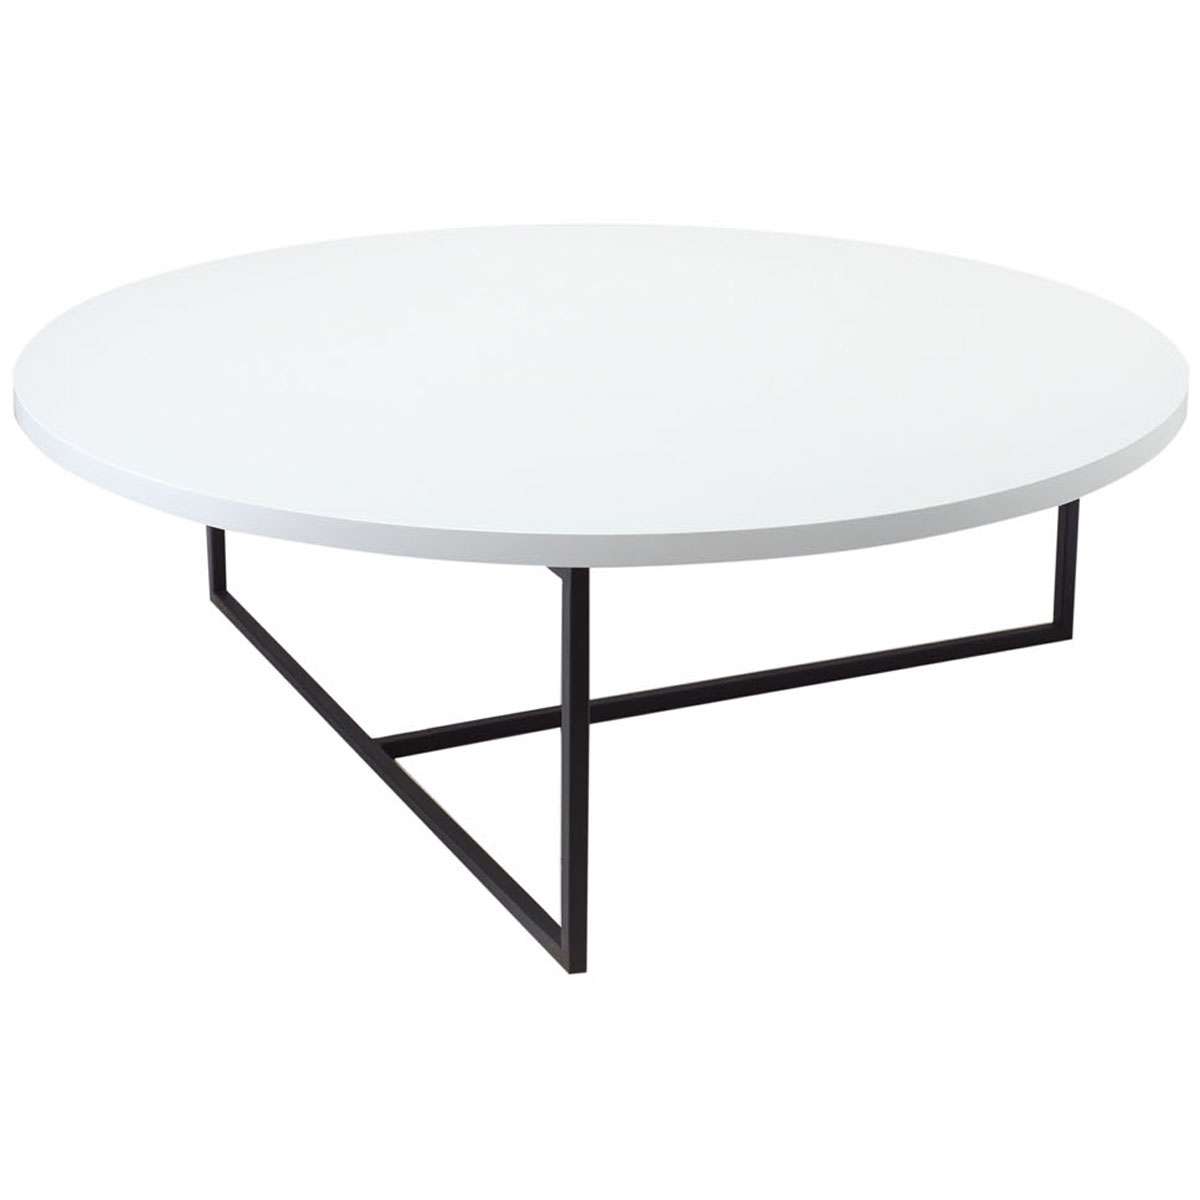 Stunning Dolf Round Coffee Table round contemporary coffee tables